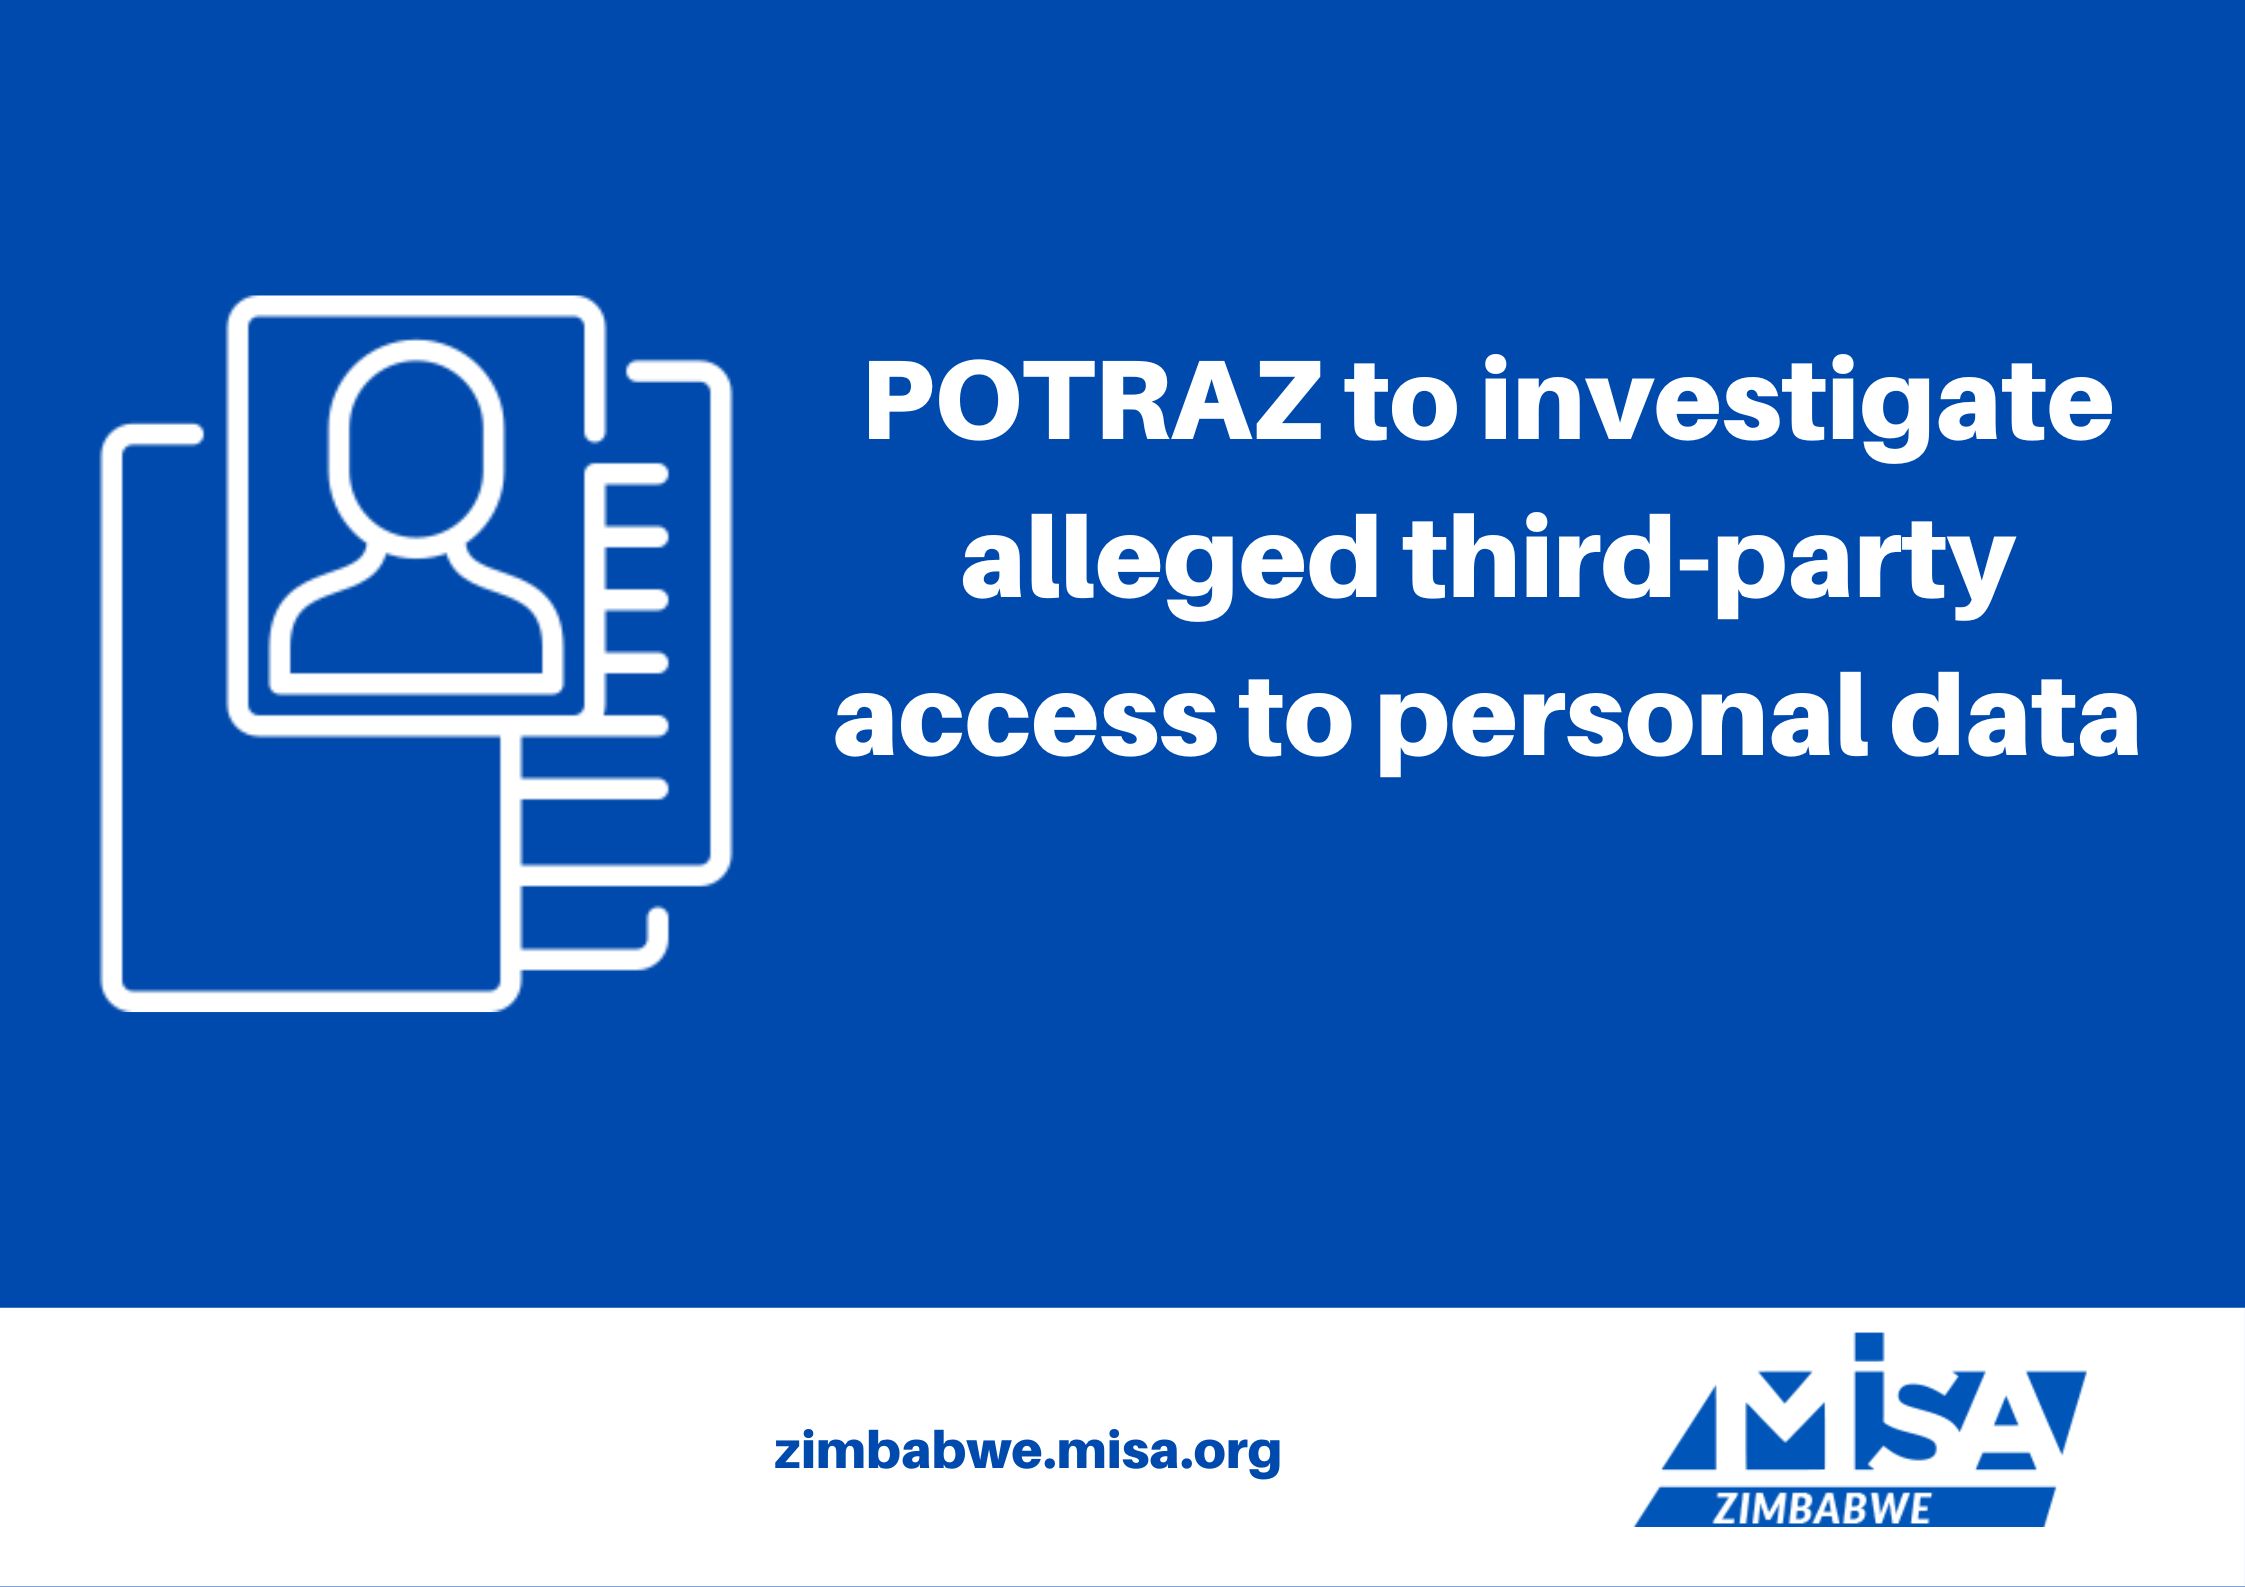 POTRAZ to investigate alleged third-party access to personal data